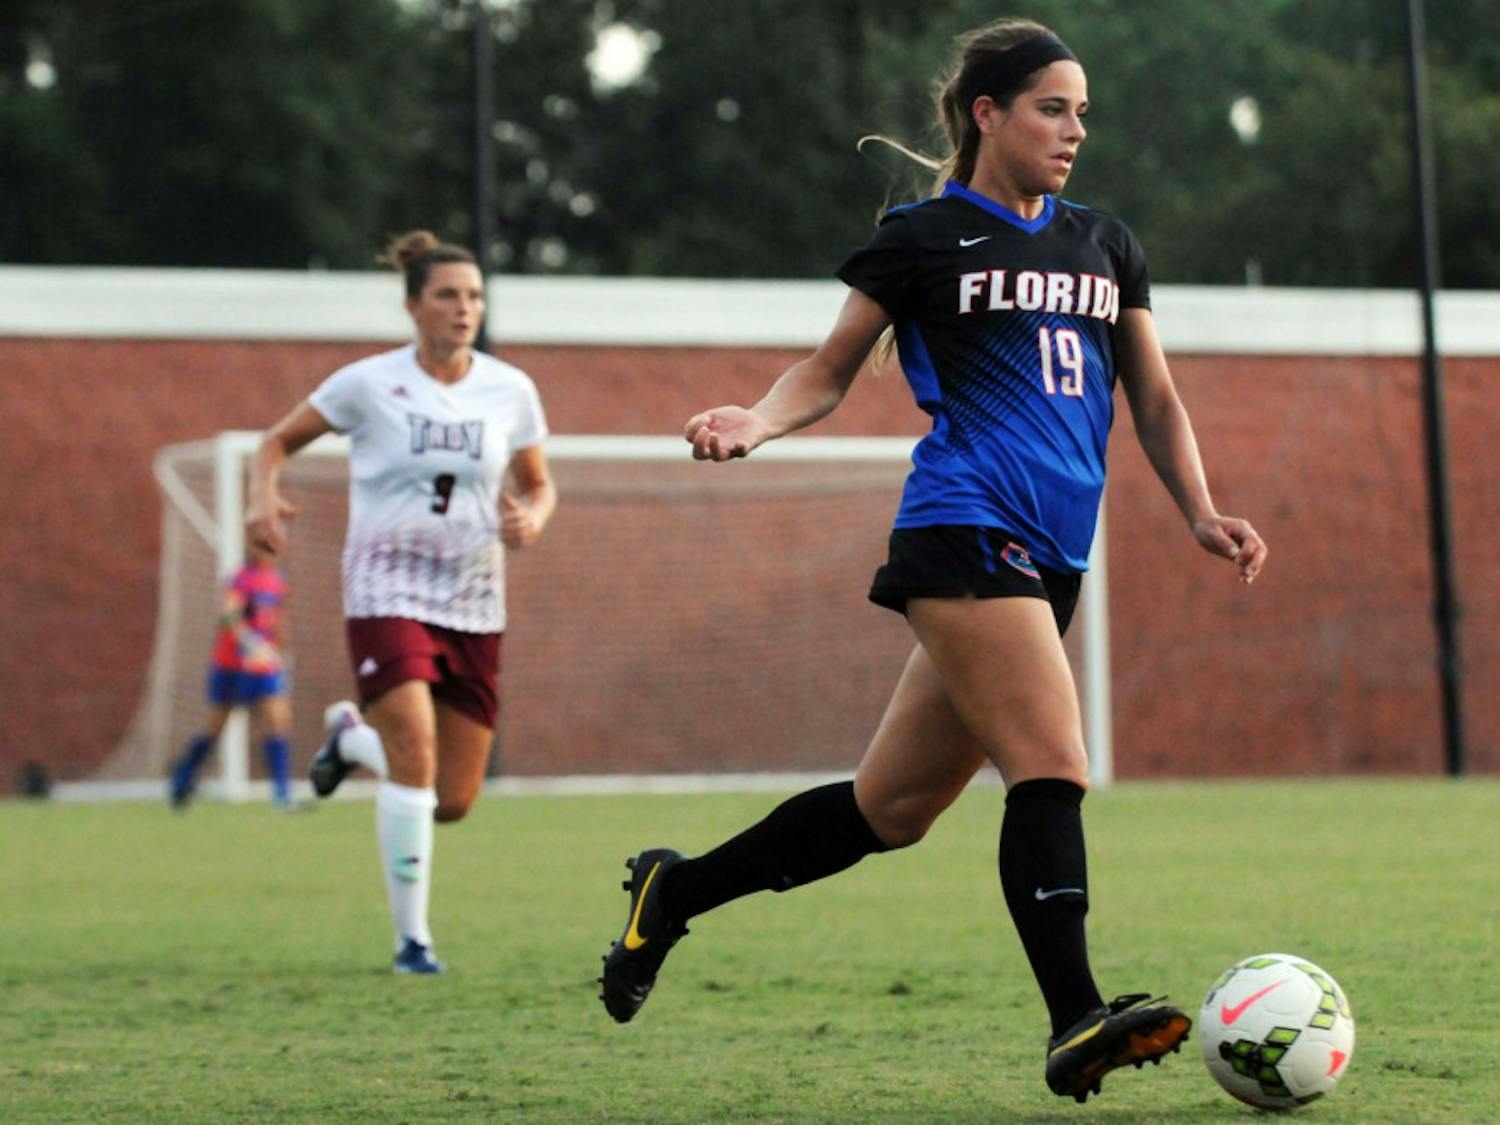 UF's Kristen Cardano dribbles during Florida's 2-1 win against Troy in an exhibition match on Aug. 11, 2015, at the soccer practice field at Donald R. Dizney Stadium.